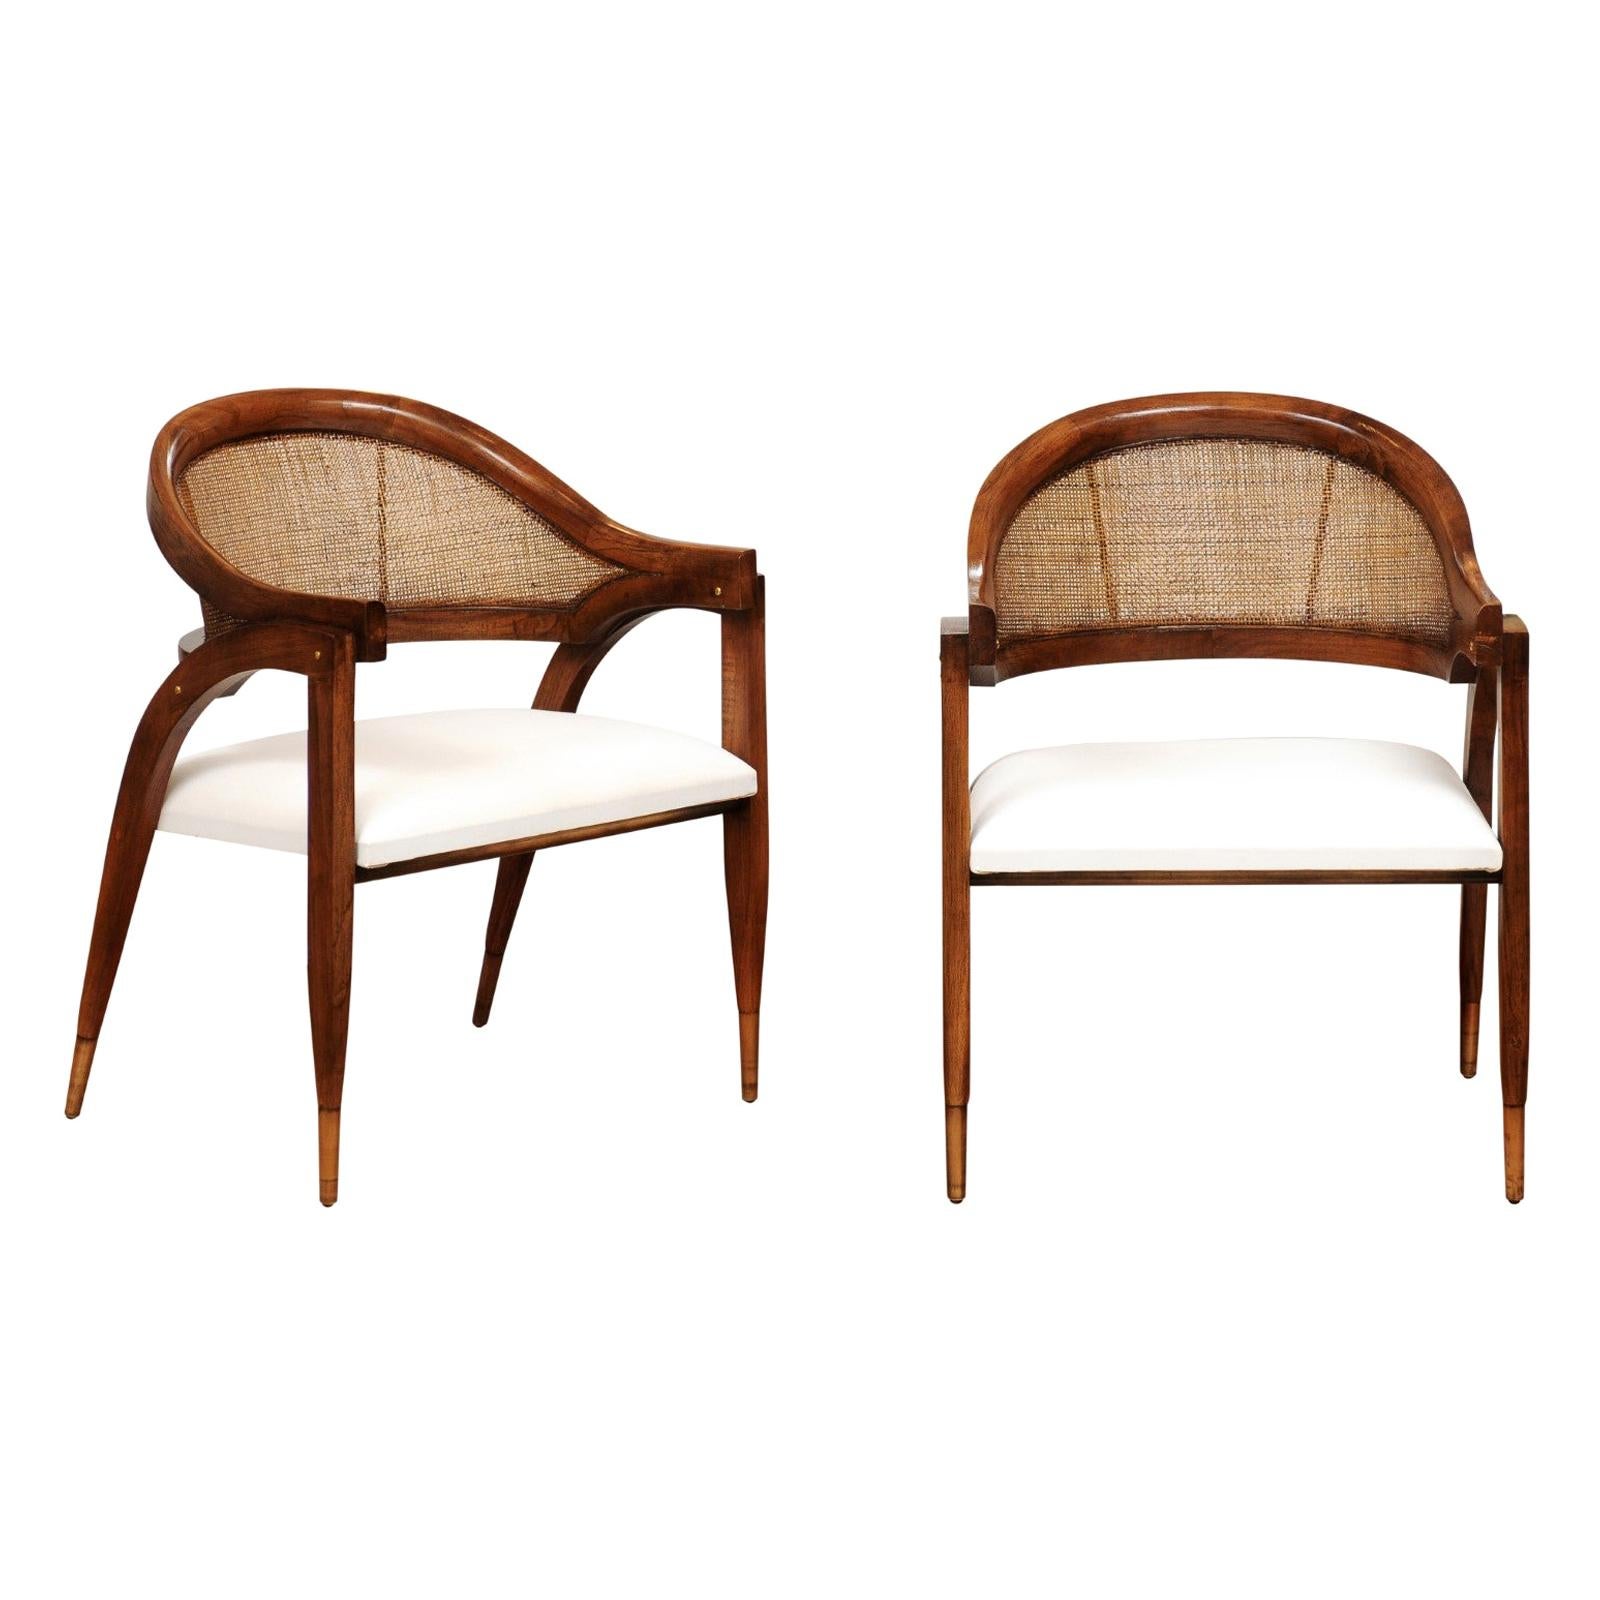 Stunning Restored Pair of Custom Teak and Cane Captains Chairs